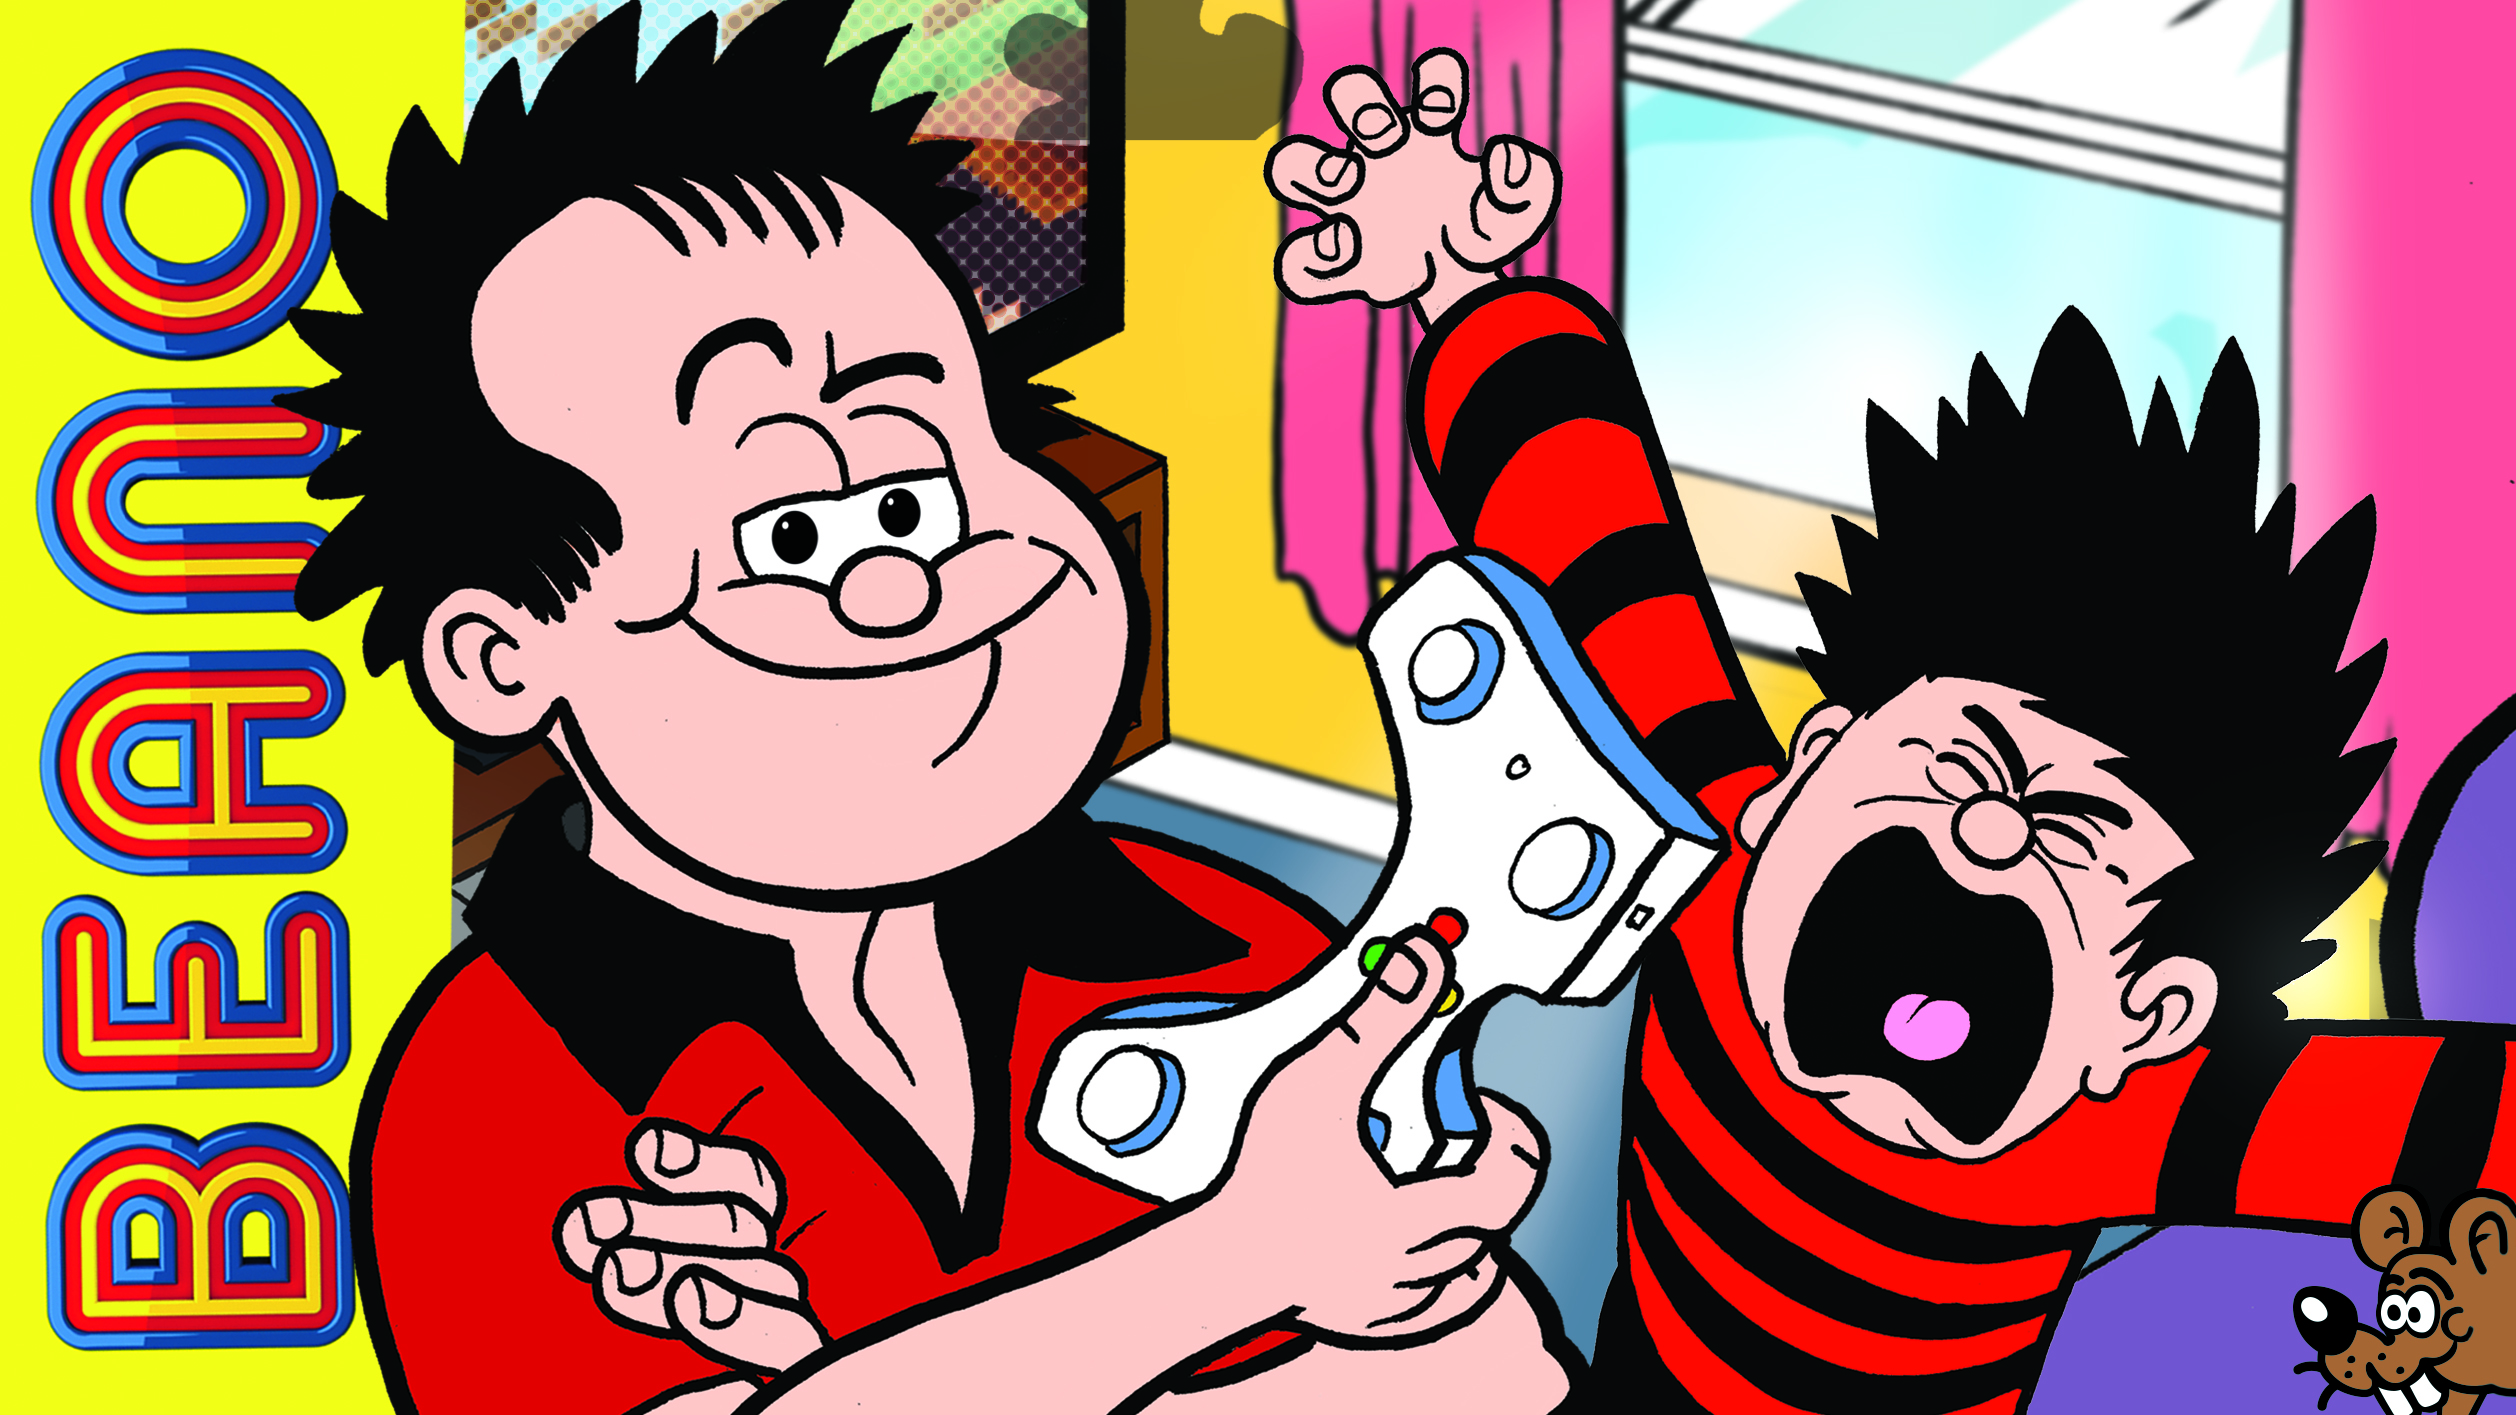 Inside Beano no. 4039 - Oh no! Dennis is grounded!